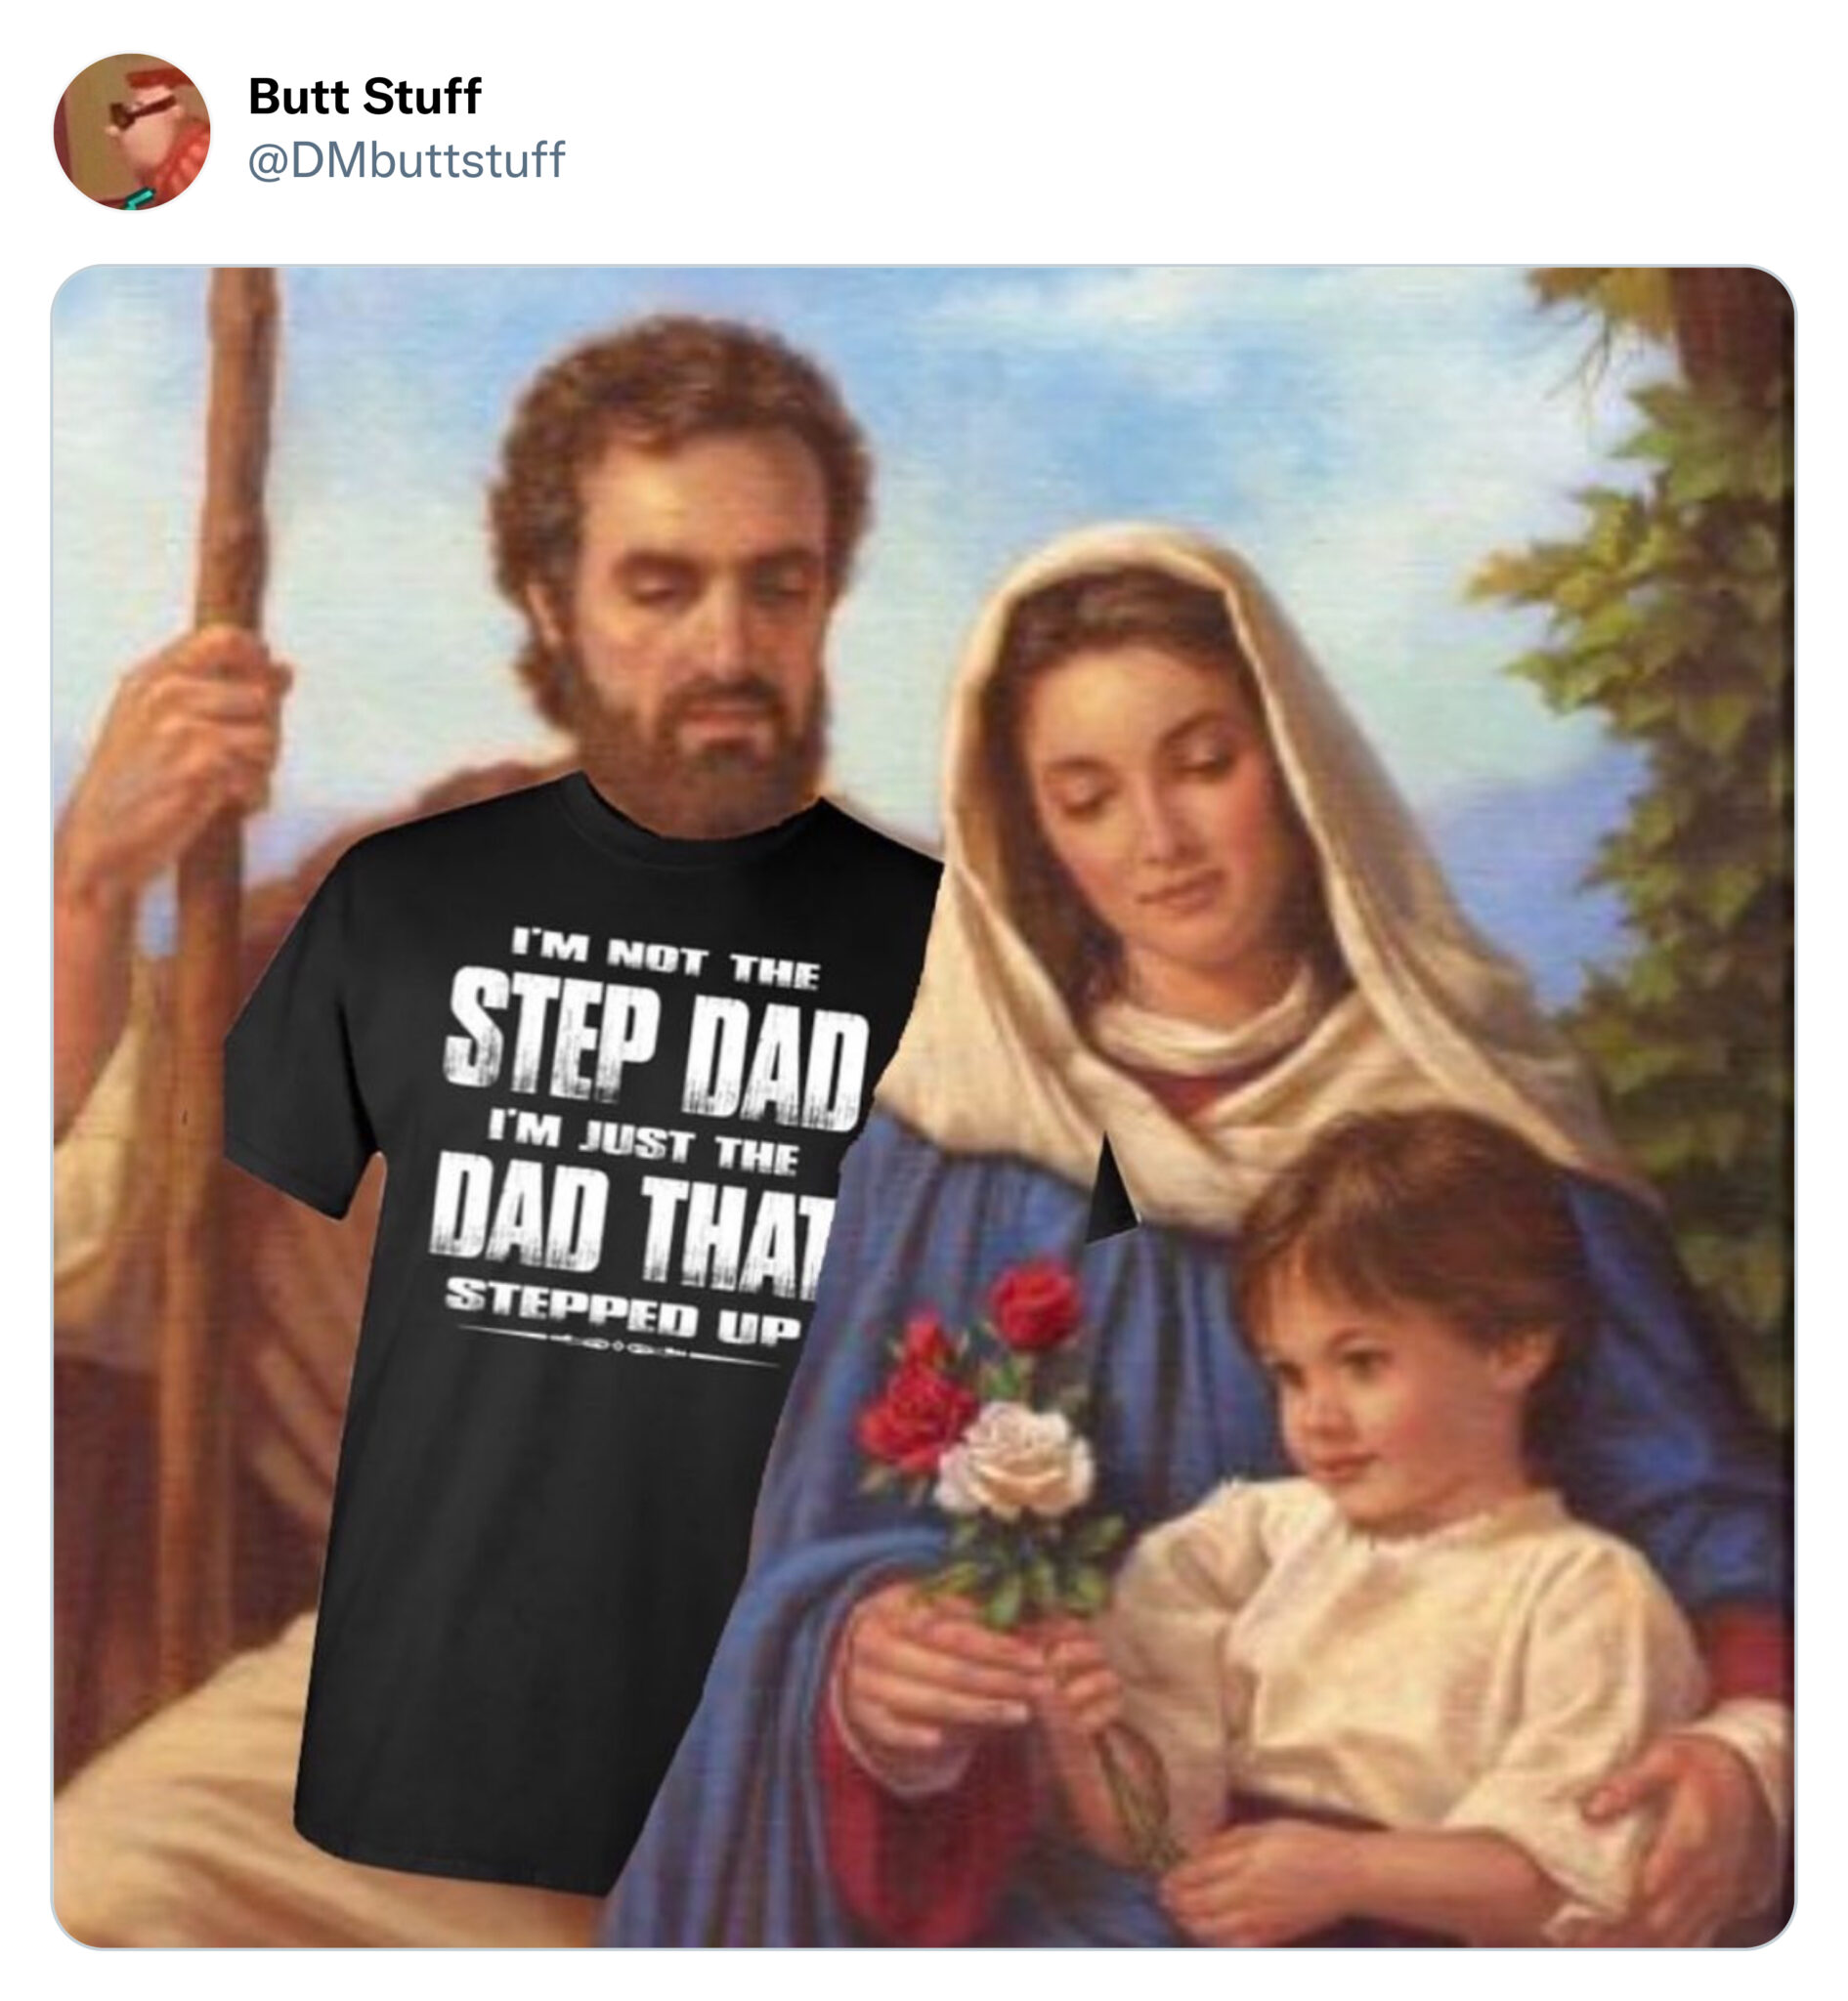 funny tweets and posts on twitter -  holy family canvas - Butt Stuff I'M Not The Step Dad I'M Just The Dad That Stepped Up